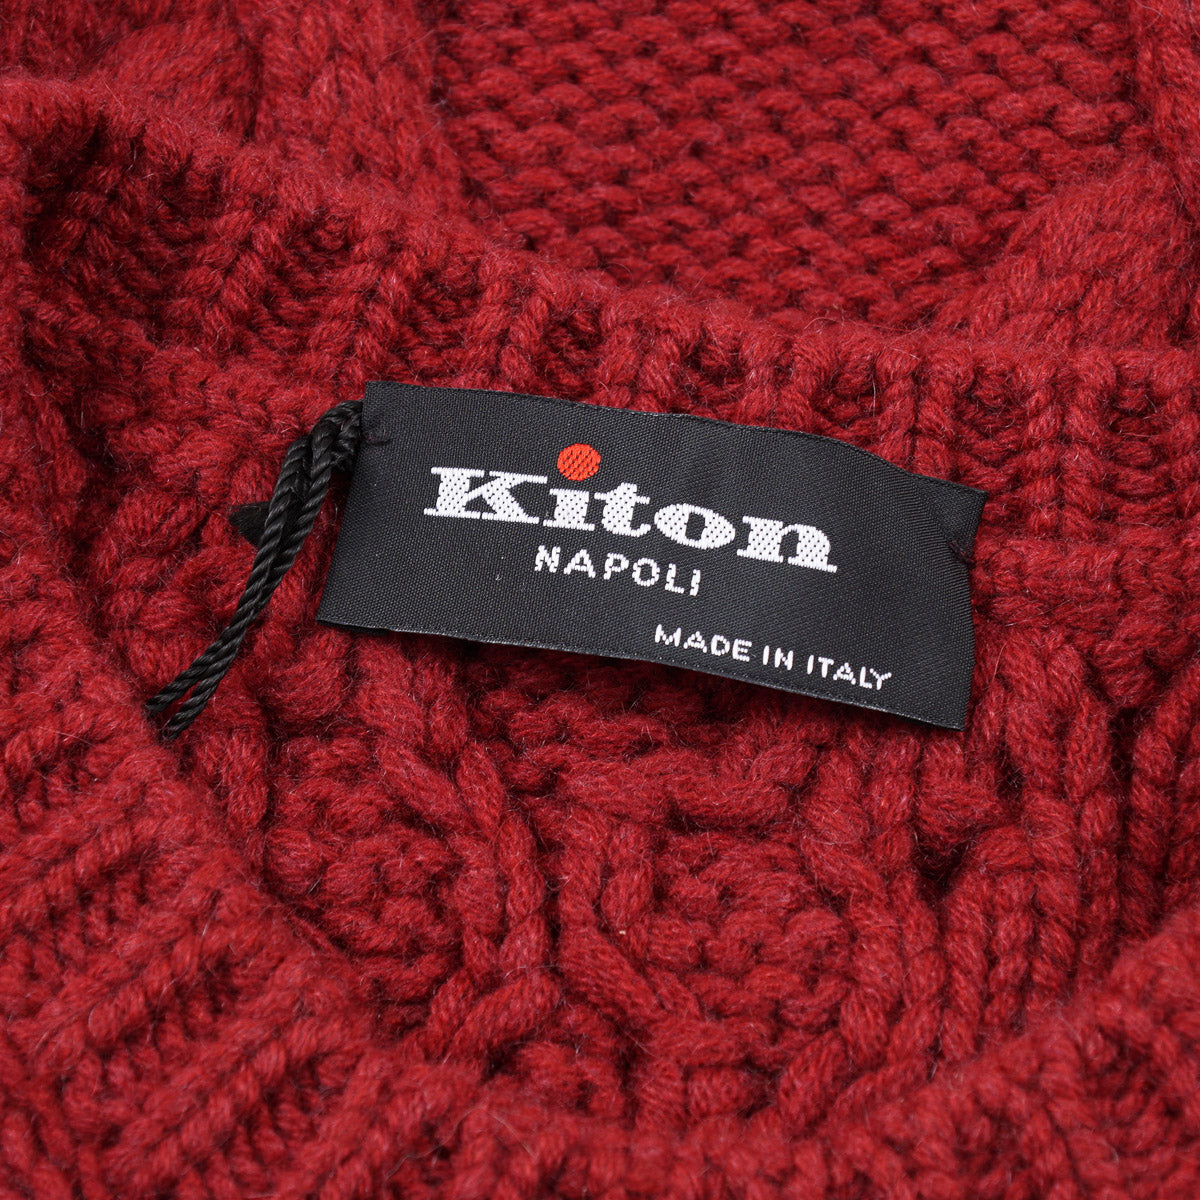 Kiton Cashmere Sweater with Leather Details - Top Shelf Apparel